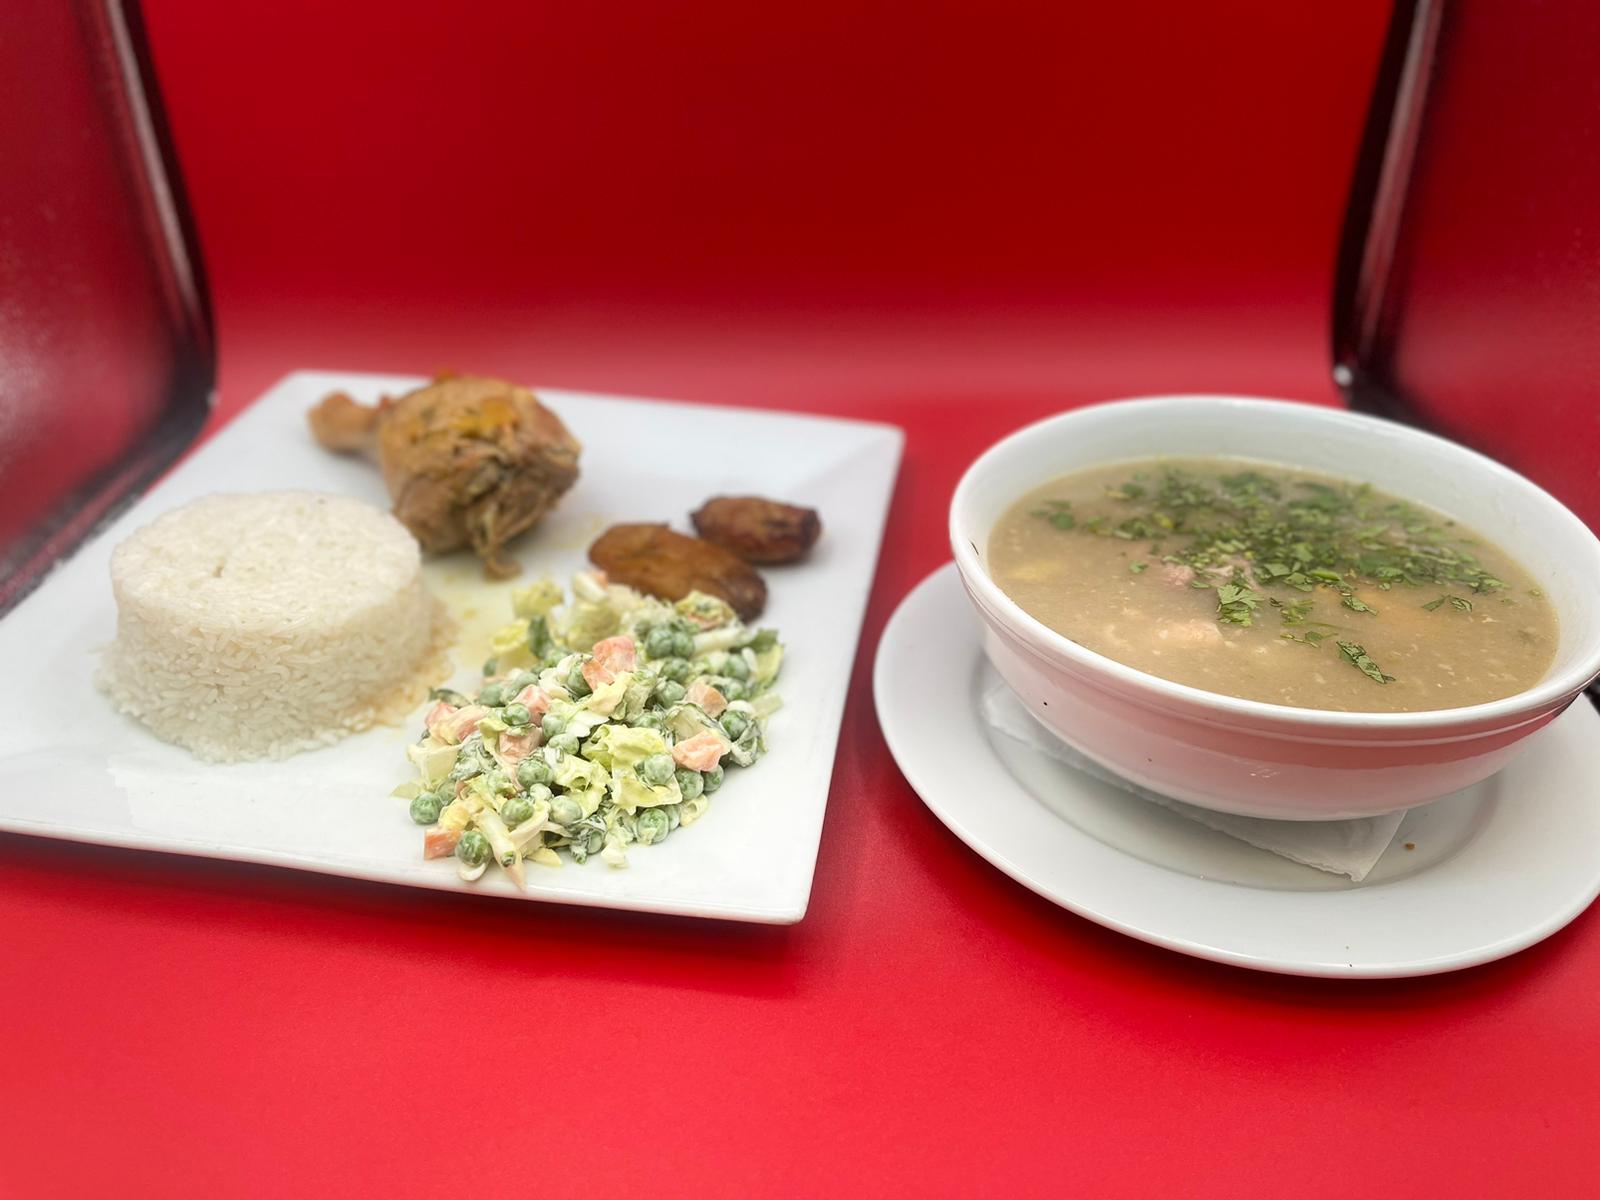 A bowl of soup and rice on a red plate.